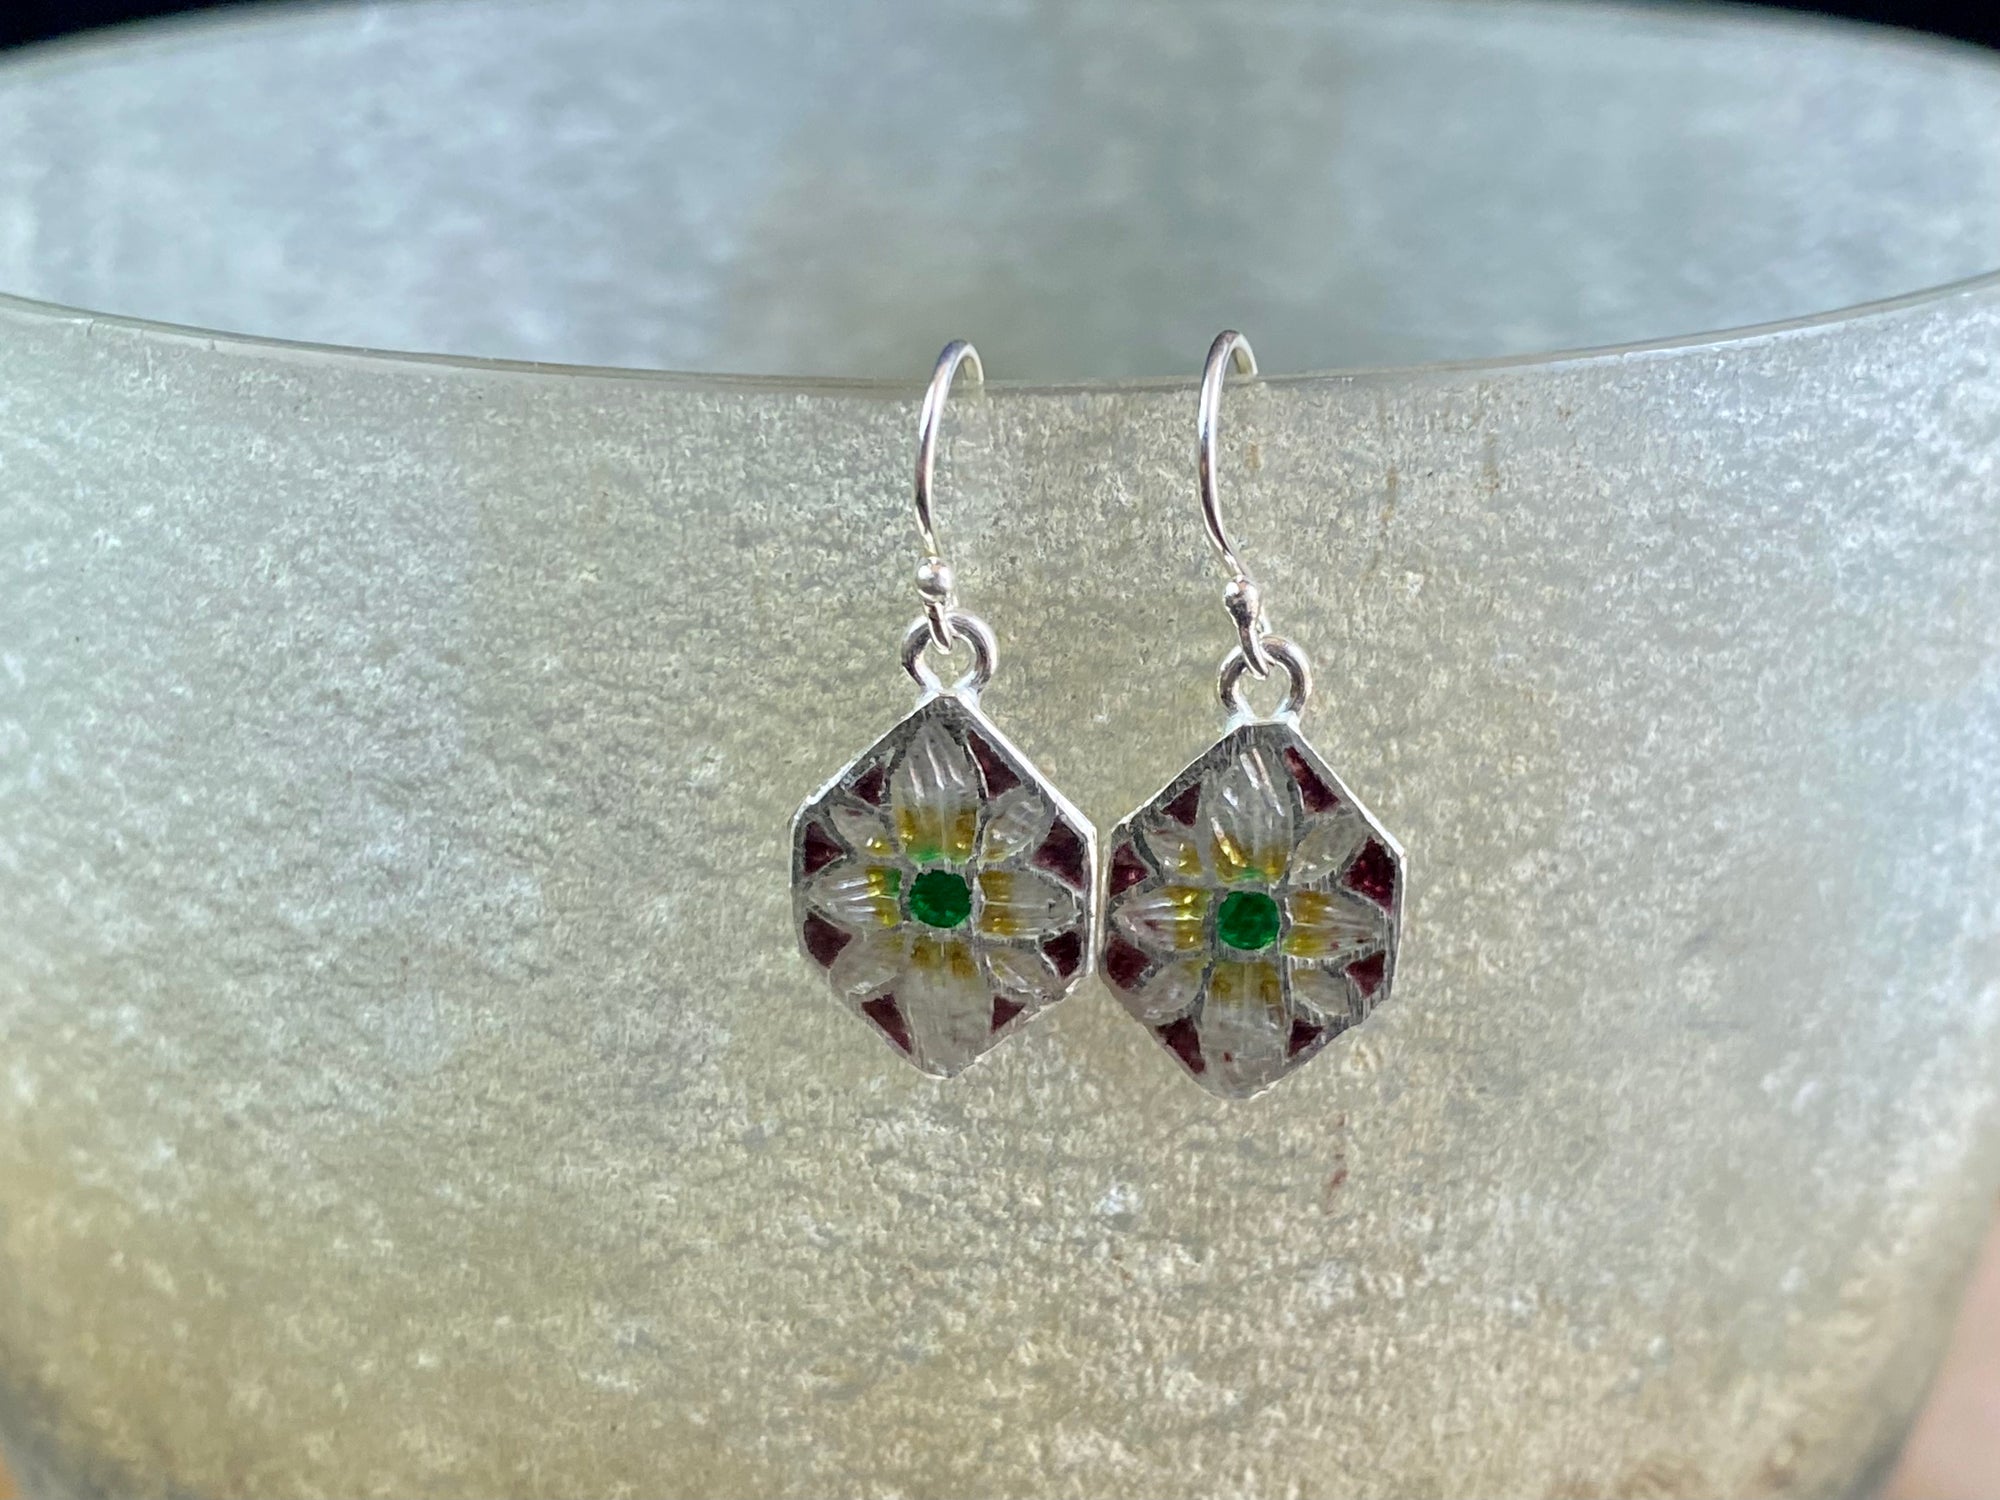 Enamel and sterling silver earrings from Jaipur, India. Lightweight and easy to wear, with sterling silver hooks. Plain silver backs. Length 2.7 cm 